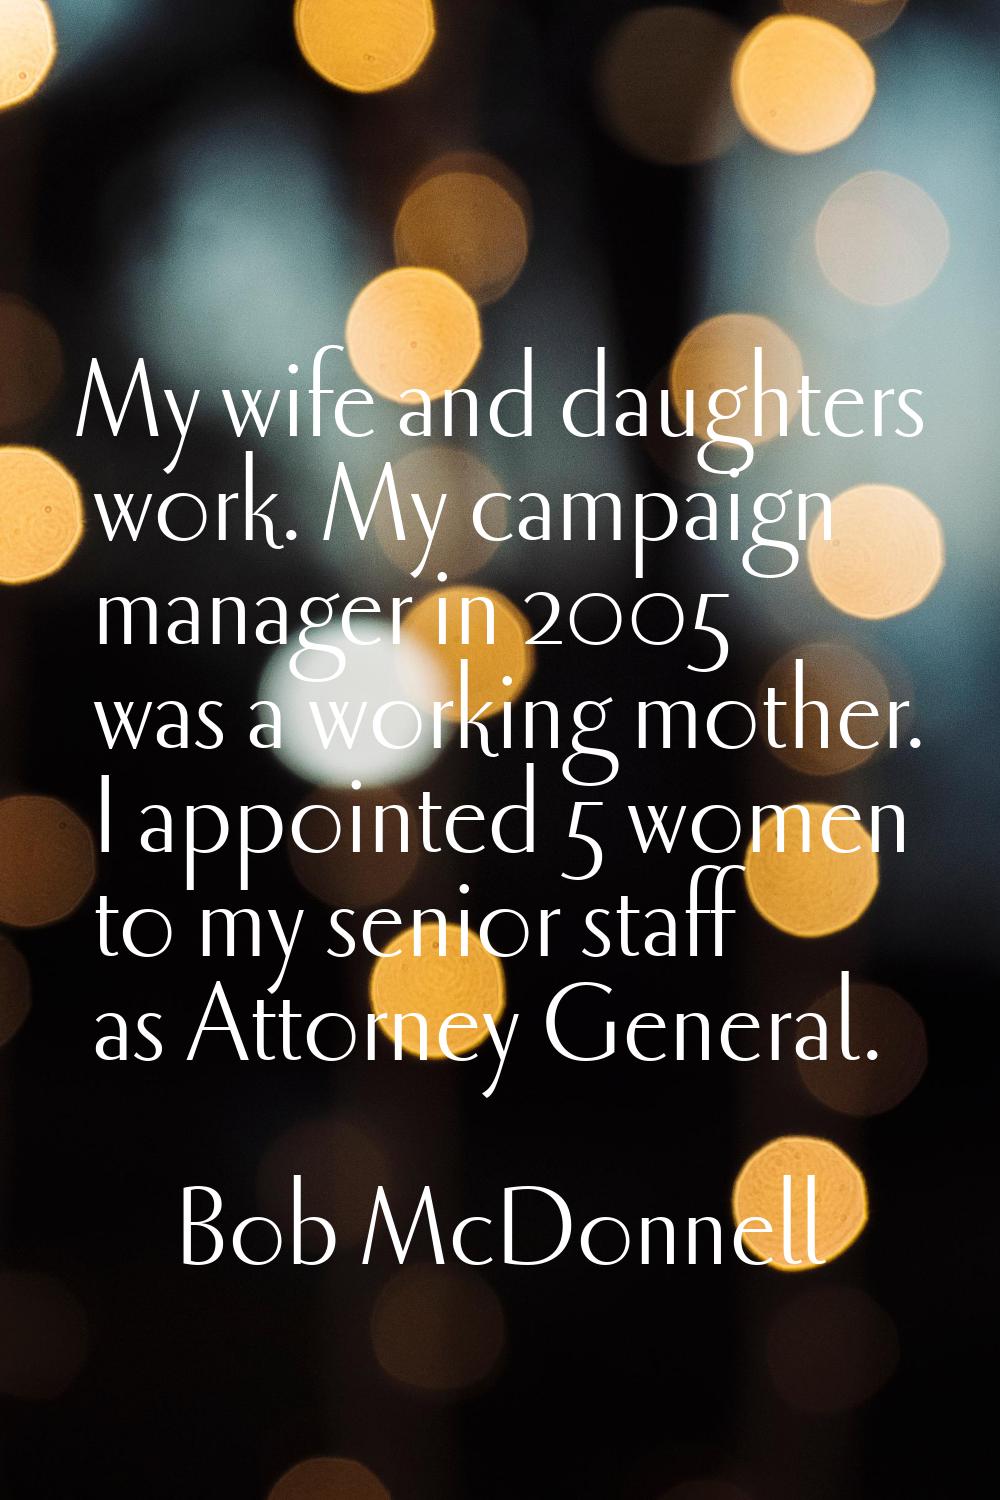 My wife and daughters work. My campaign manager in 2005 was a working mother. I appointed 5 women t